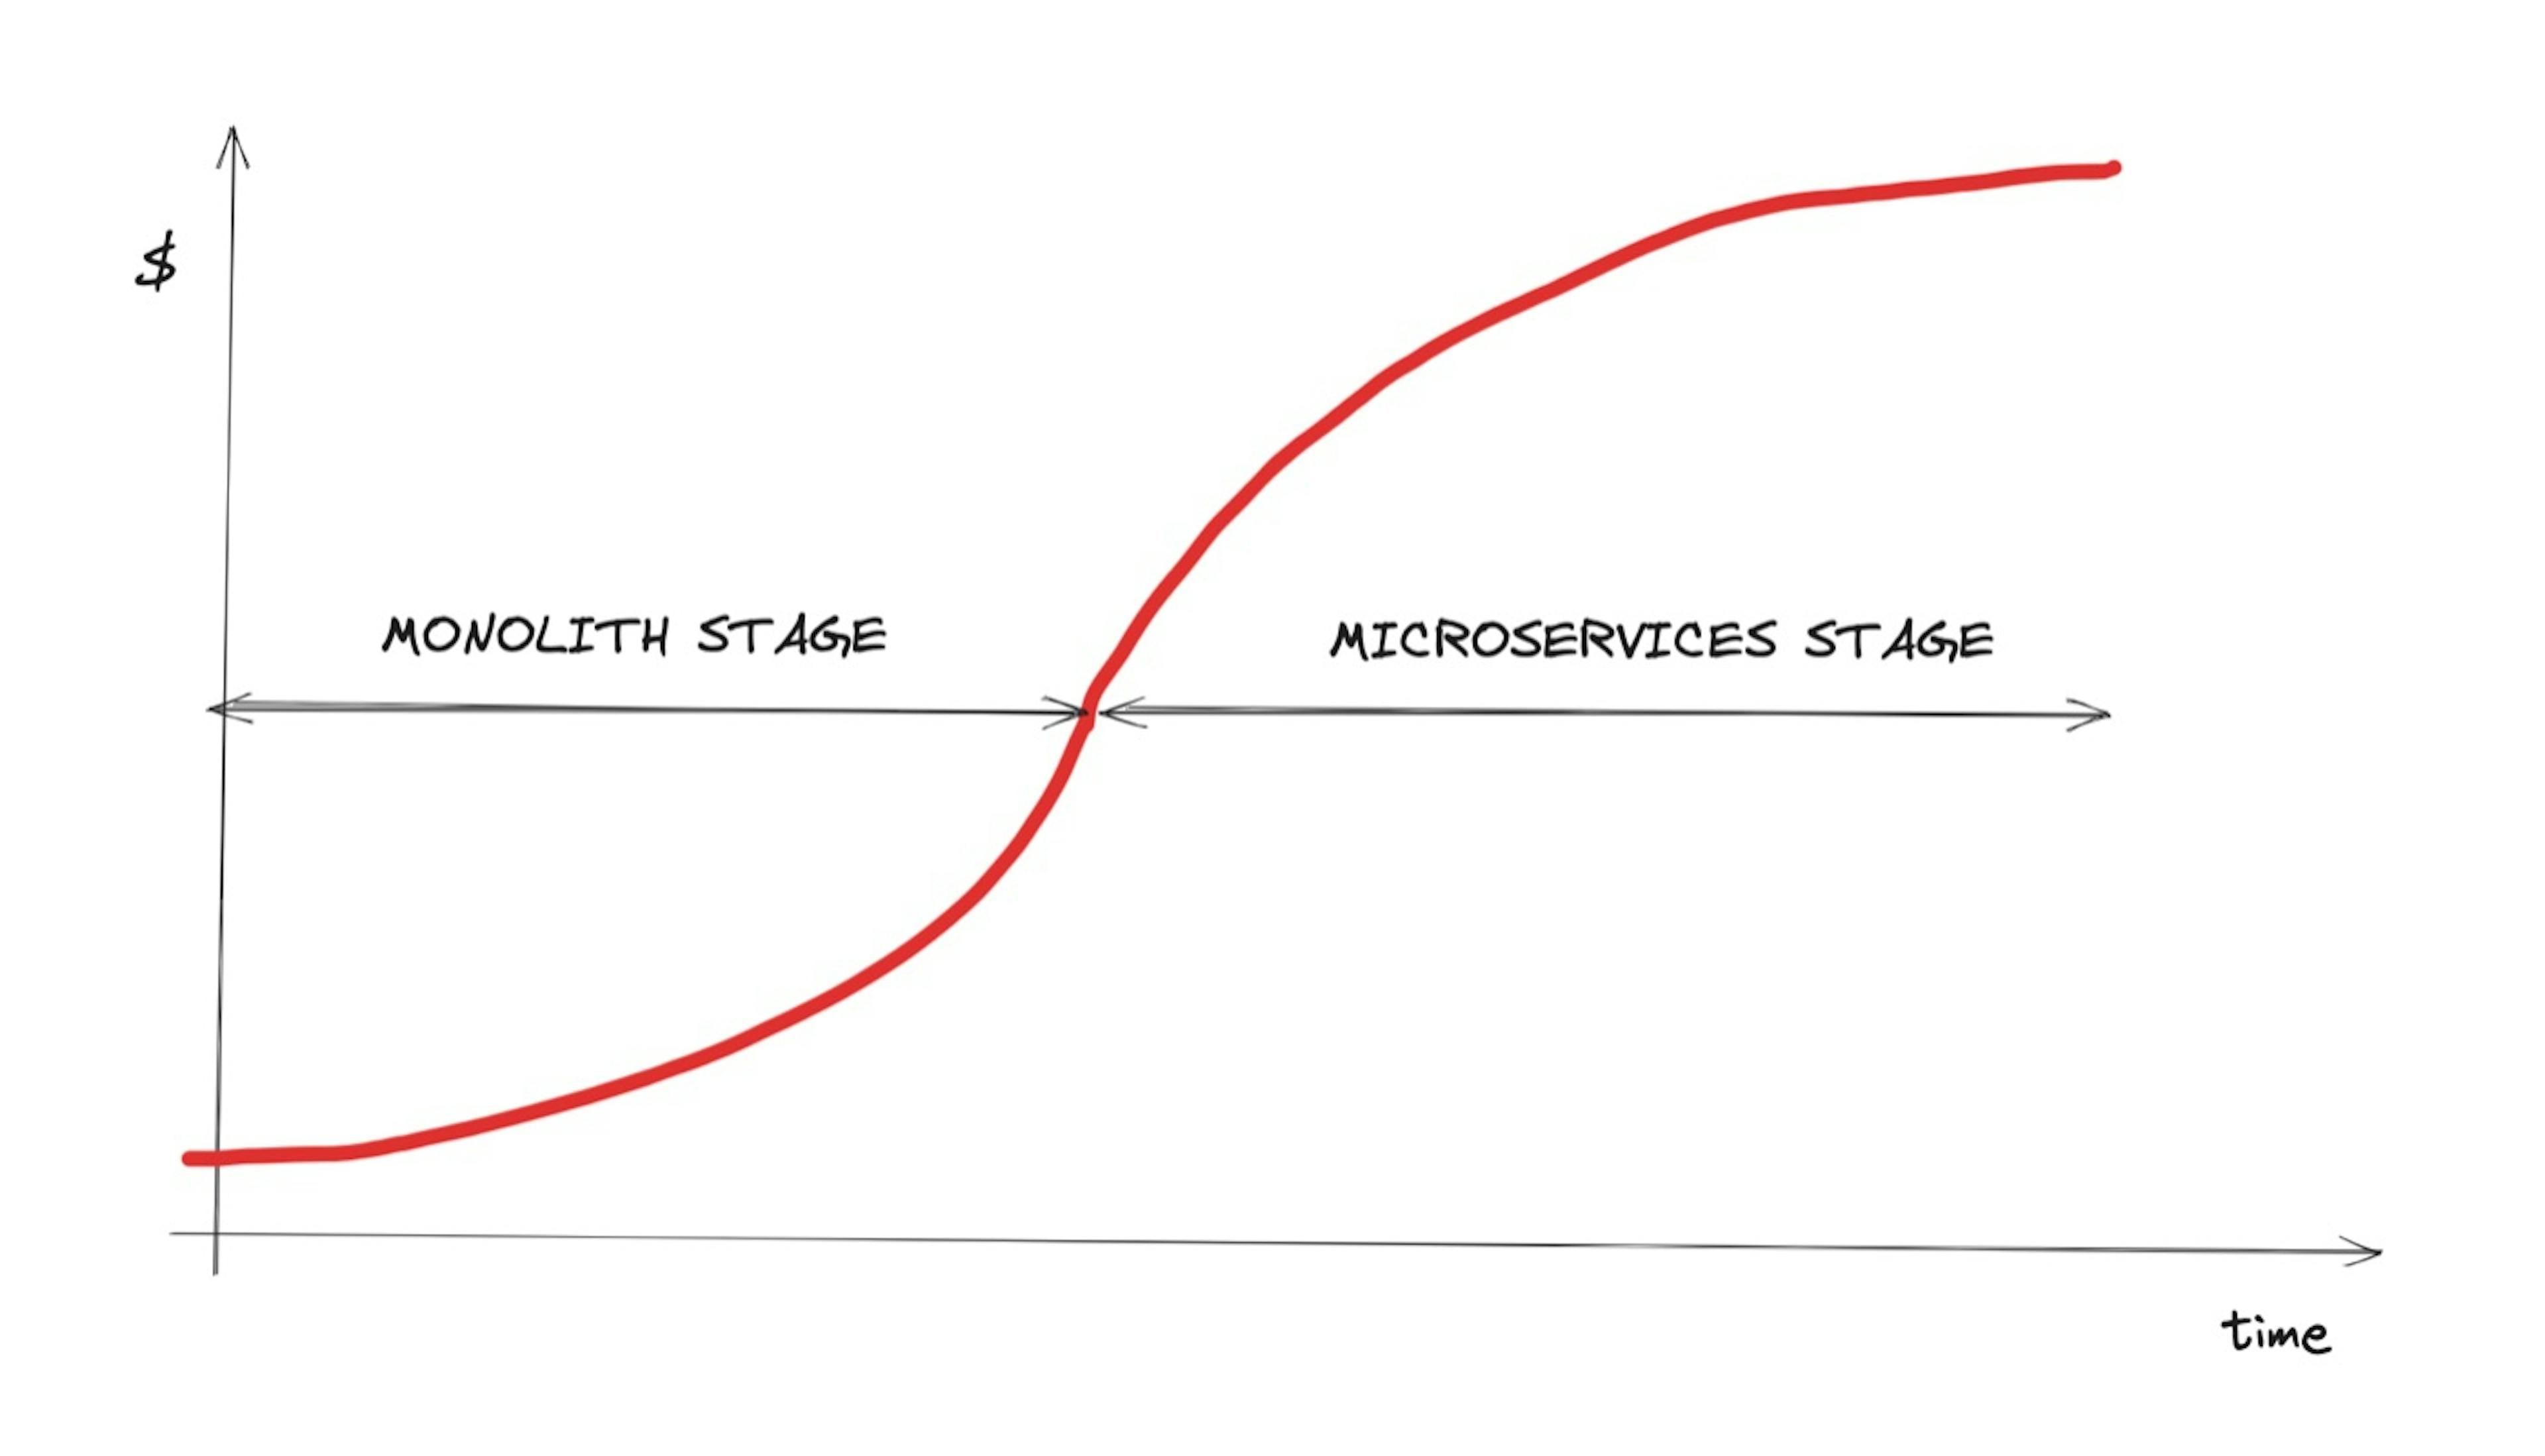 Monolith to Microservices transition cost dynamic for a single line of code